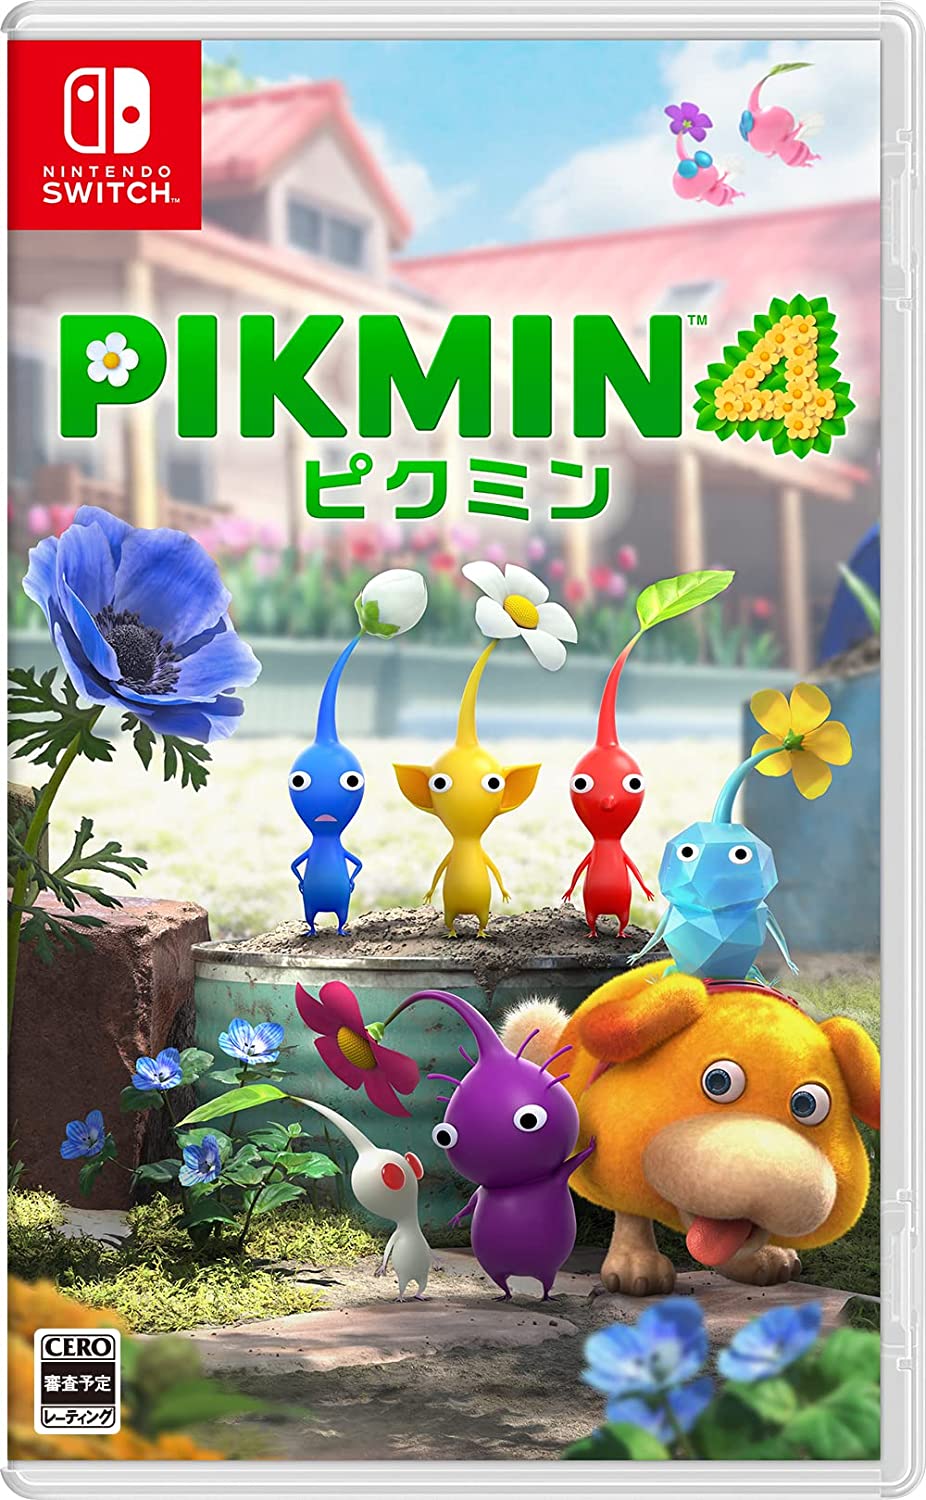 Japanese Pikmin 4 (Region Free English Included) $48.99